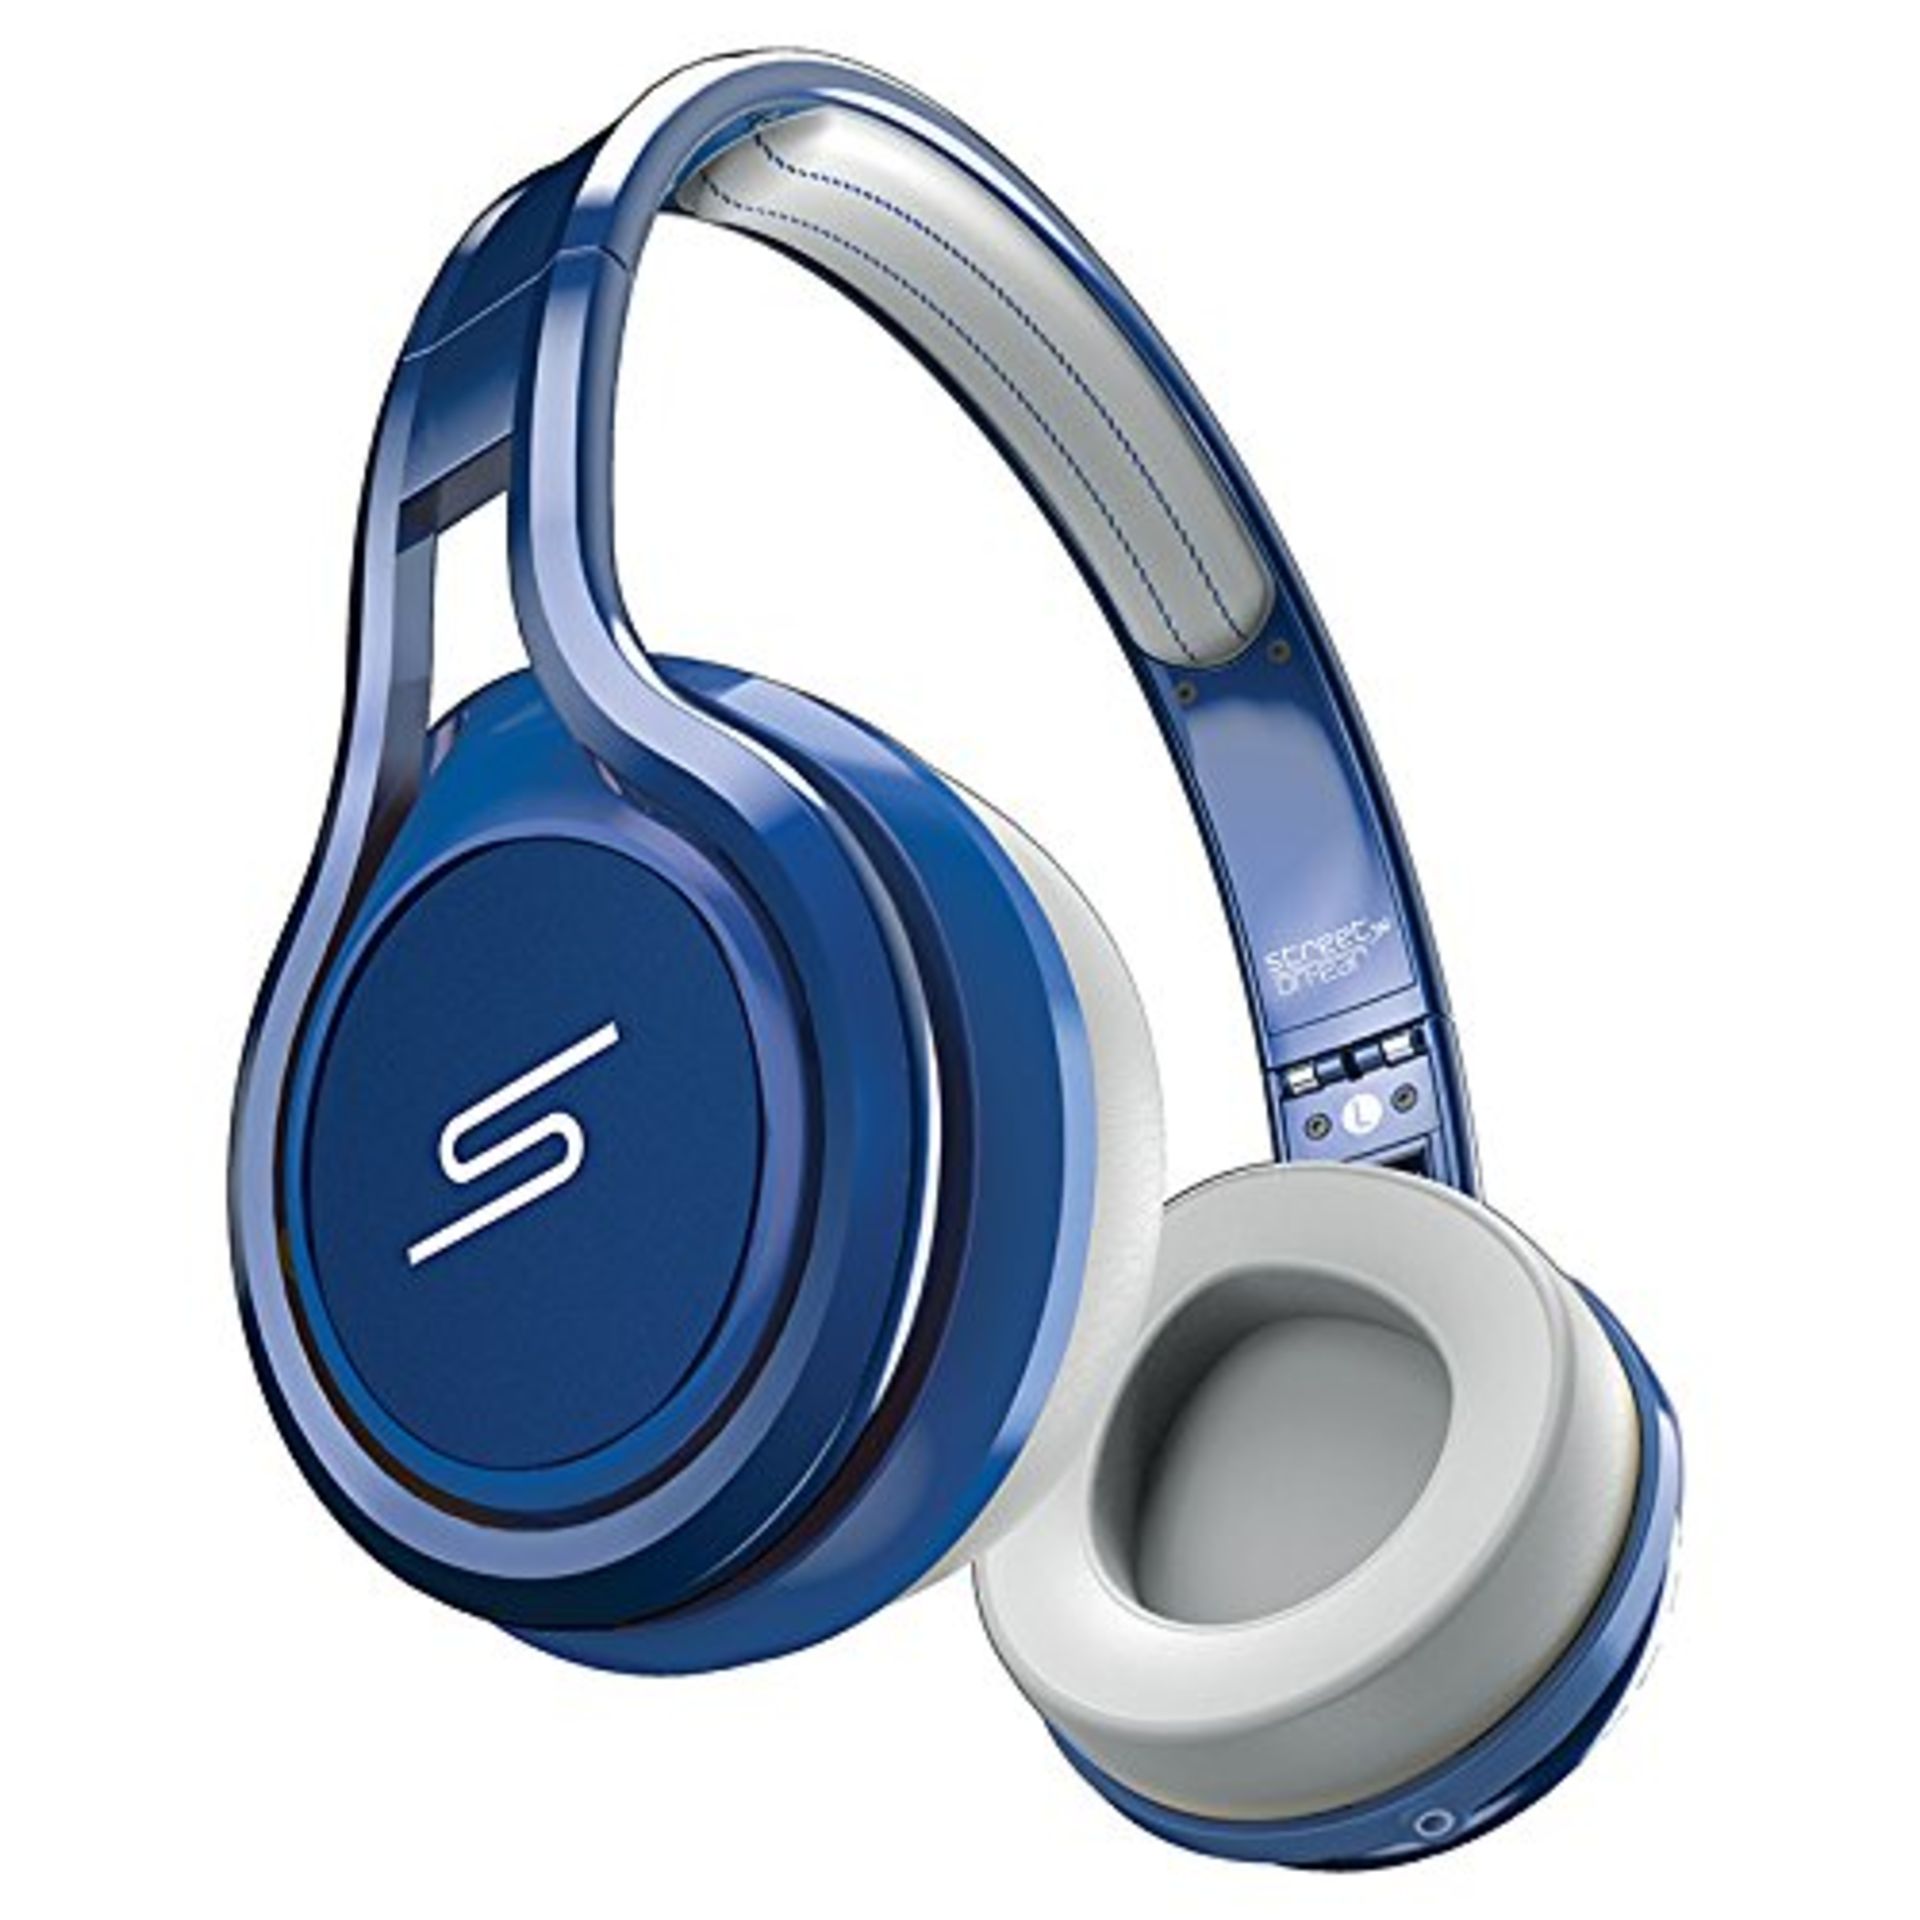 V Brand New SMS Audio Street by 50 Cent Wired On-Ear Headphones - Blue - Does Not Include